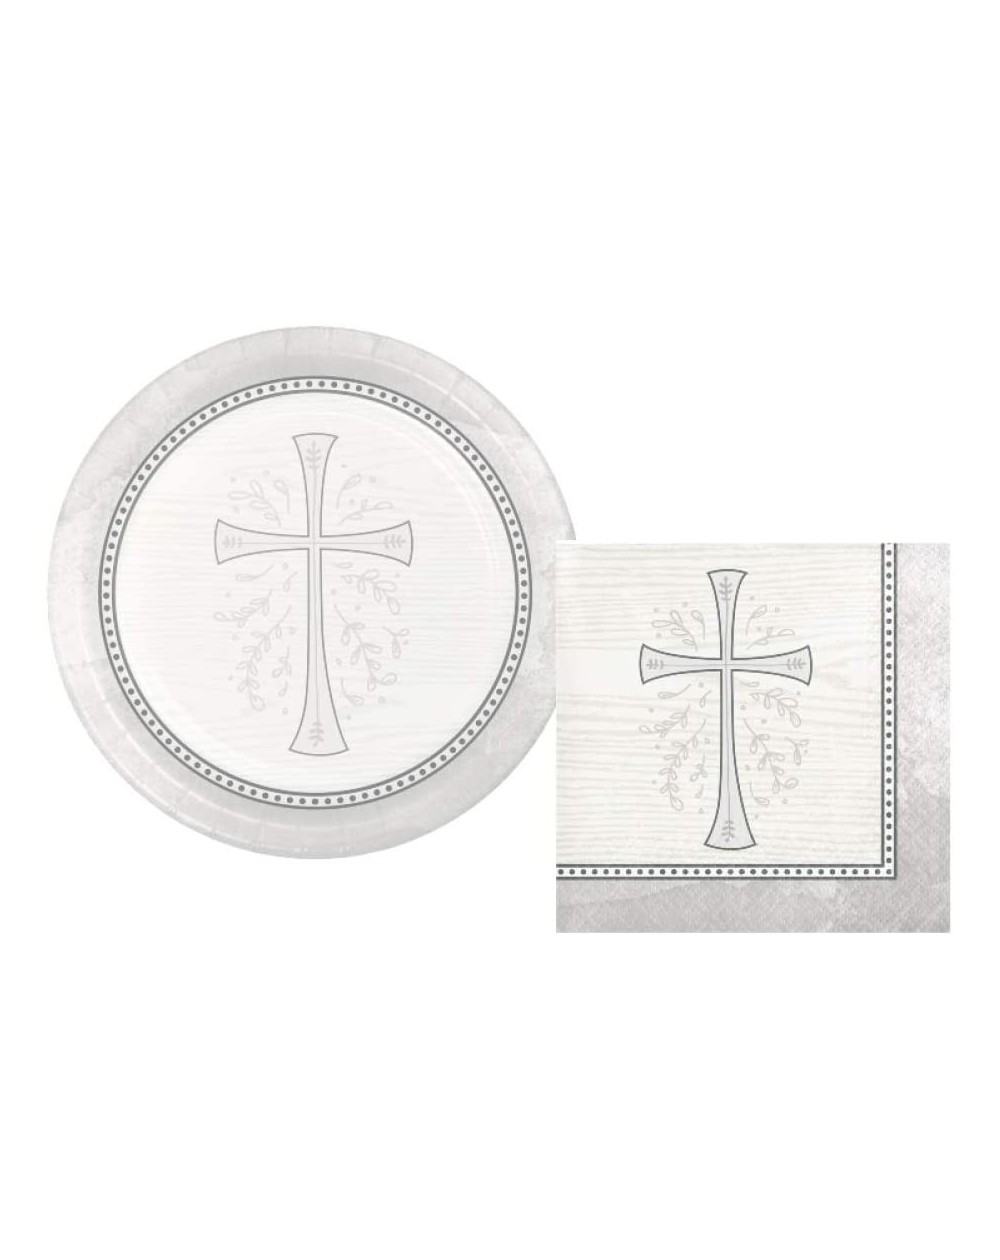 Party Packs Inspirational Religious Party Supplies Bundle Includes Dessert Plates and Napkins for 16 People in a Divinity Cro...